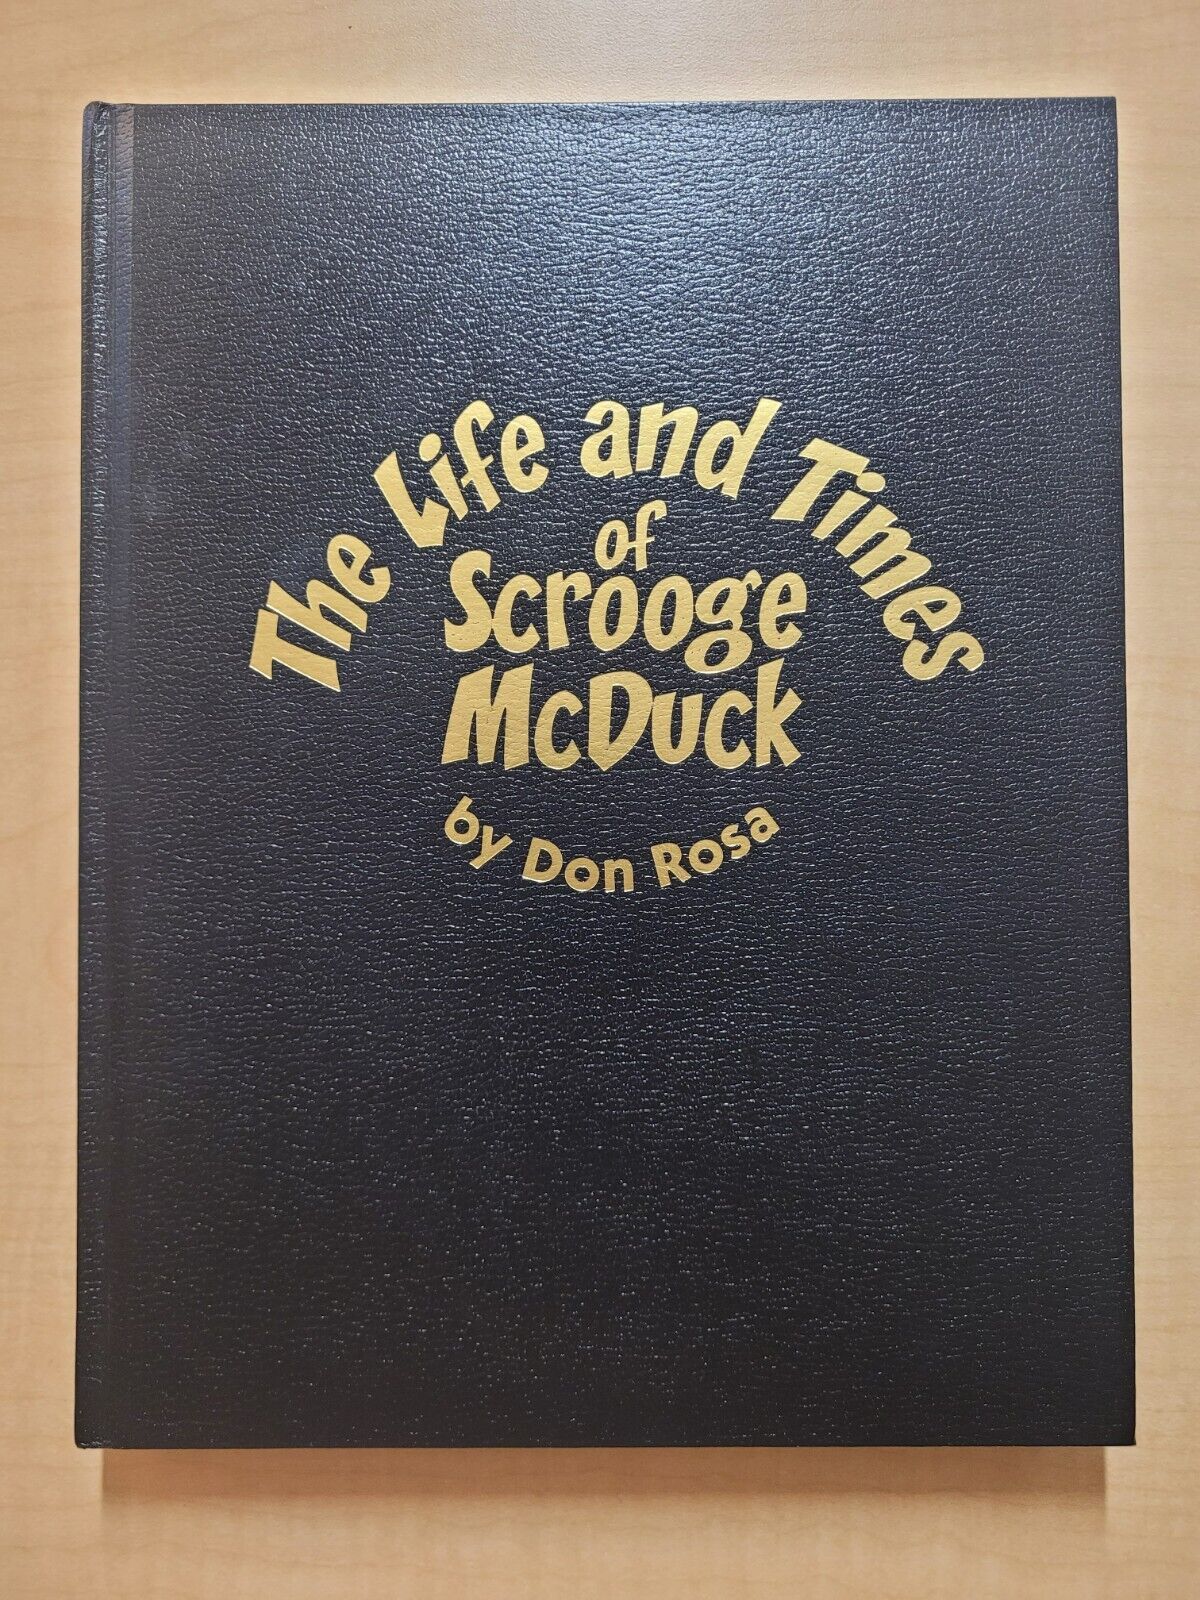 Disney THE LIFE AND TIMES OF SCROOGE MCDUCK by Don Rosa signed Limited Ed Artist